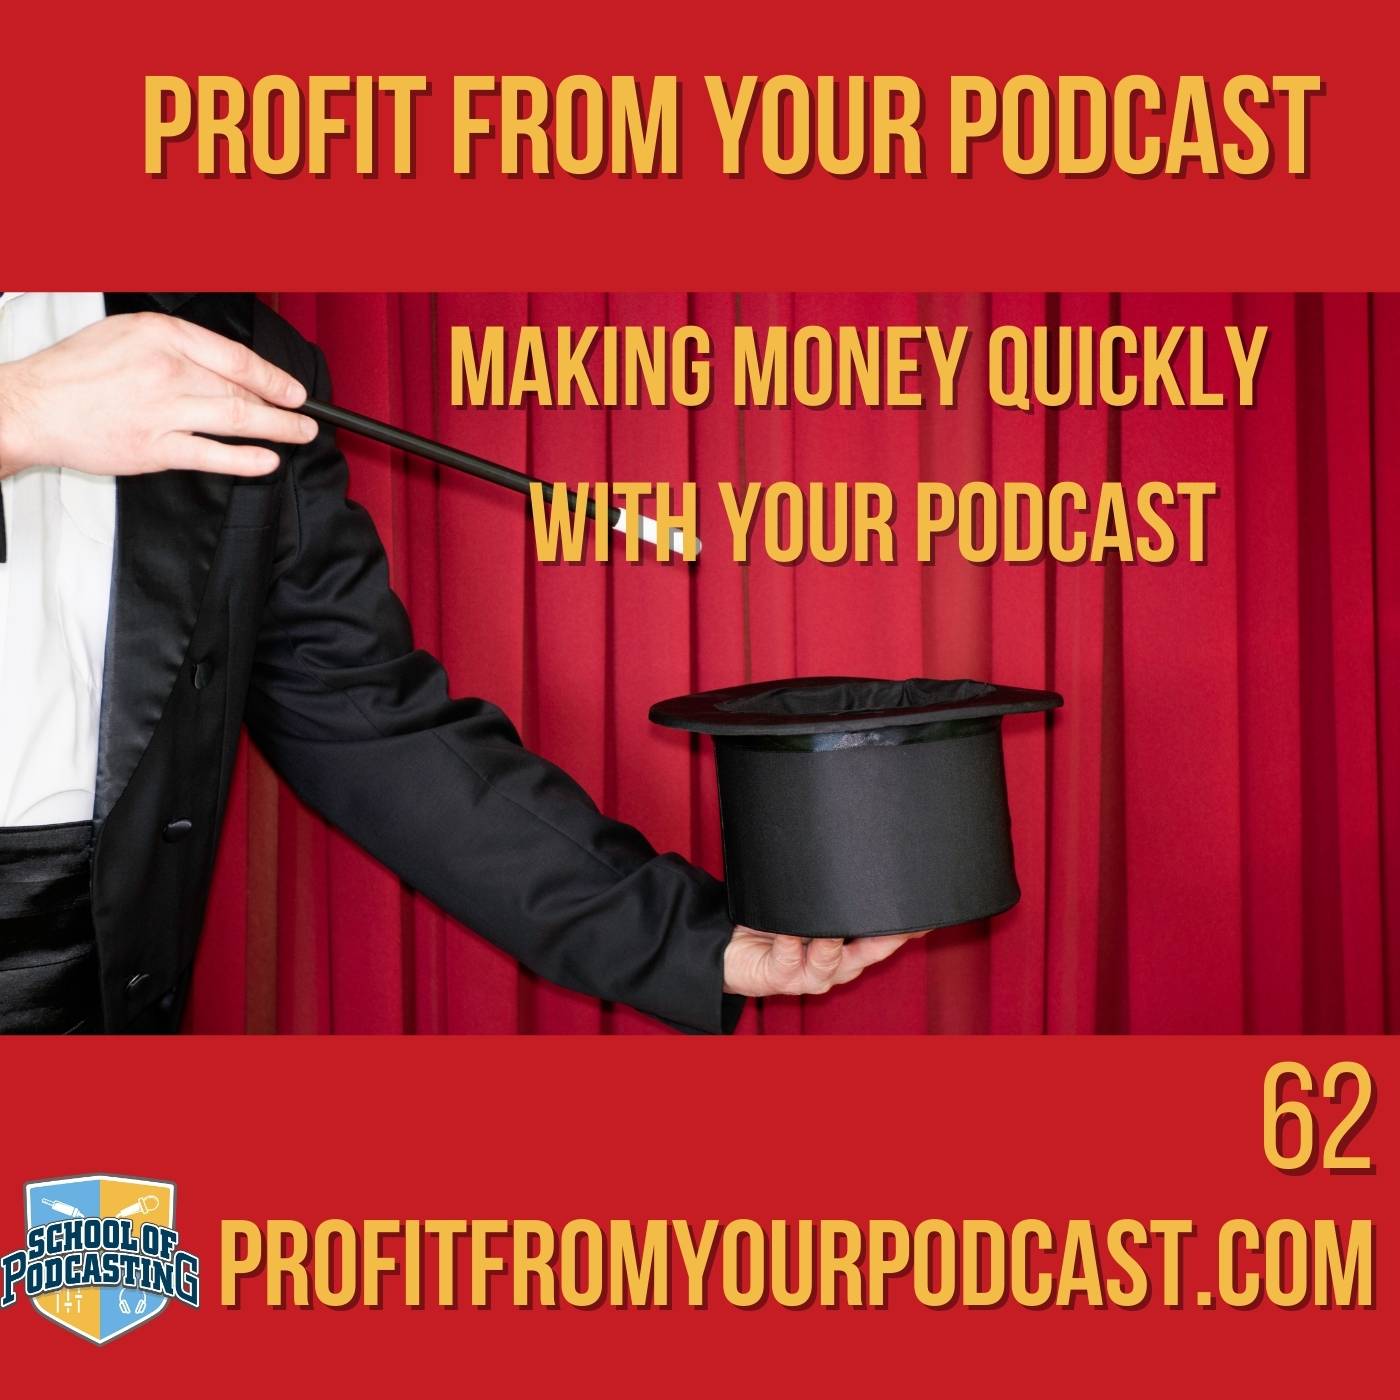 Can You Make $500 Quickly With A Brand New Podcast? Image